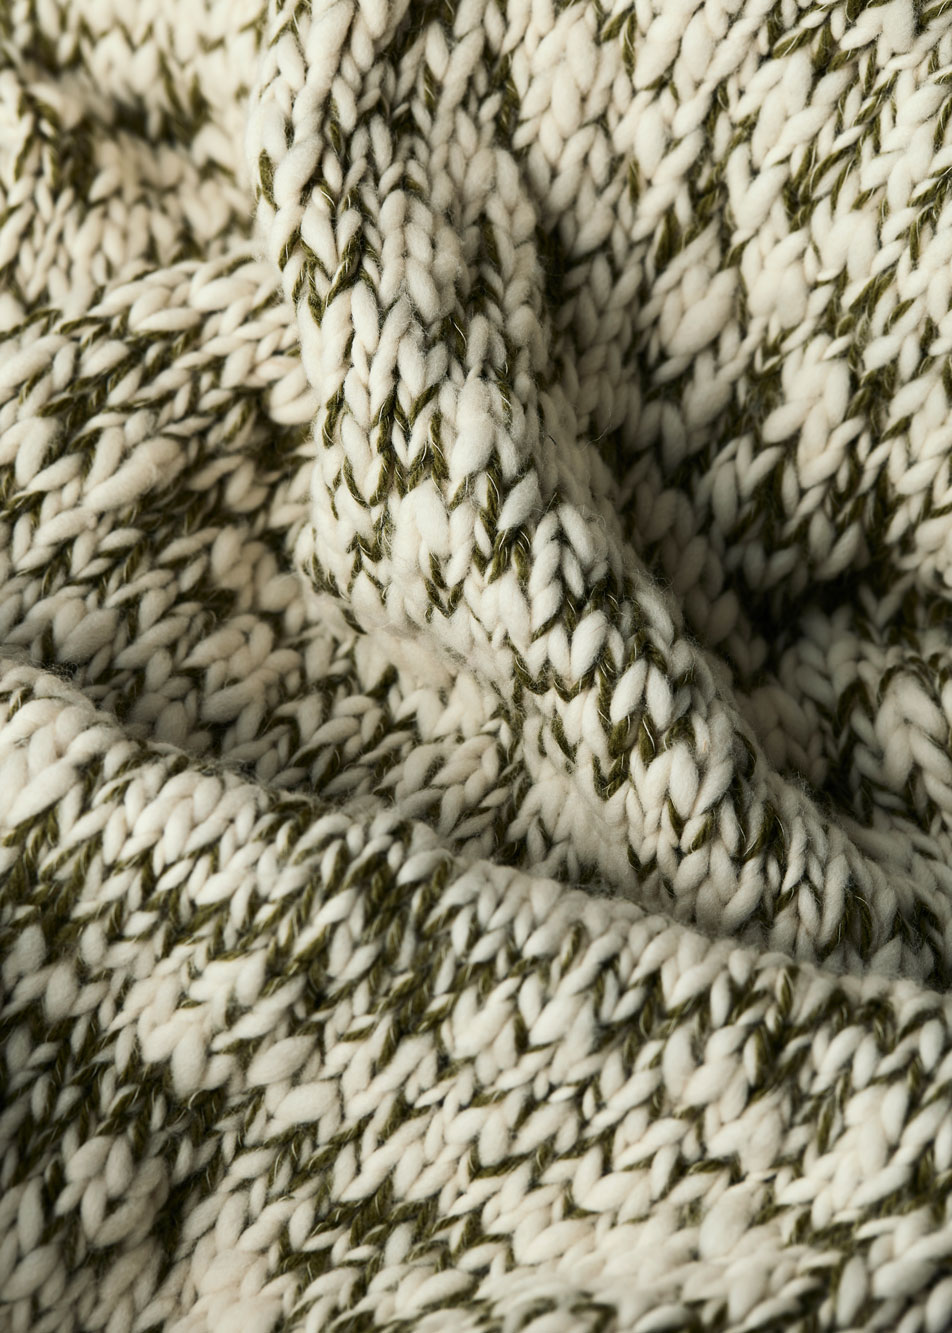 A close-up of a white and green chunky knit throw